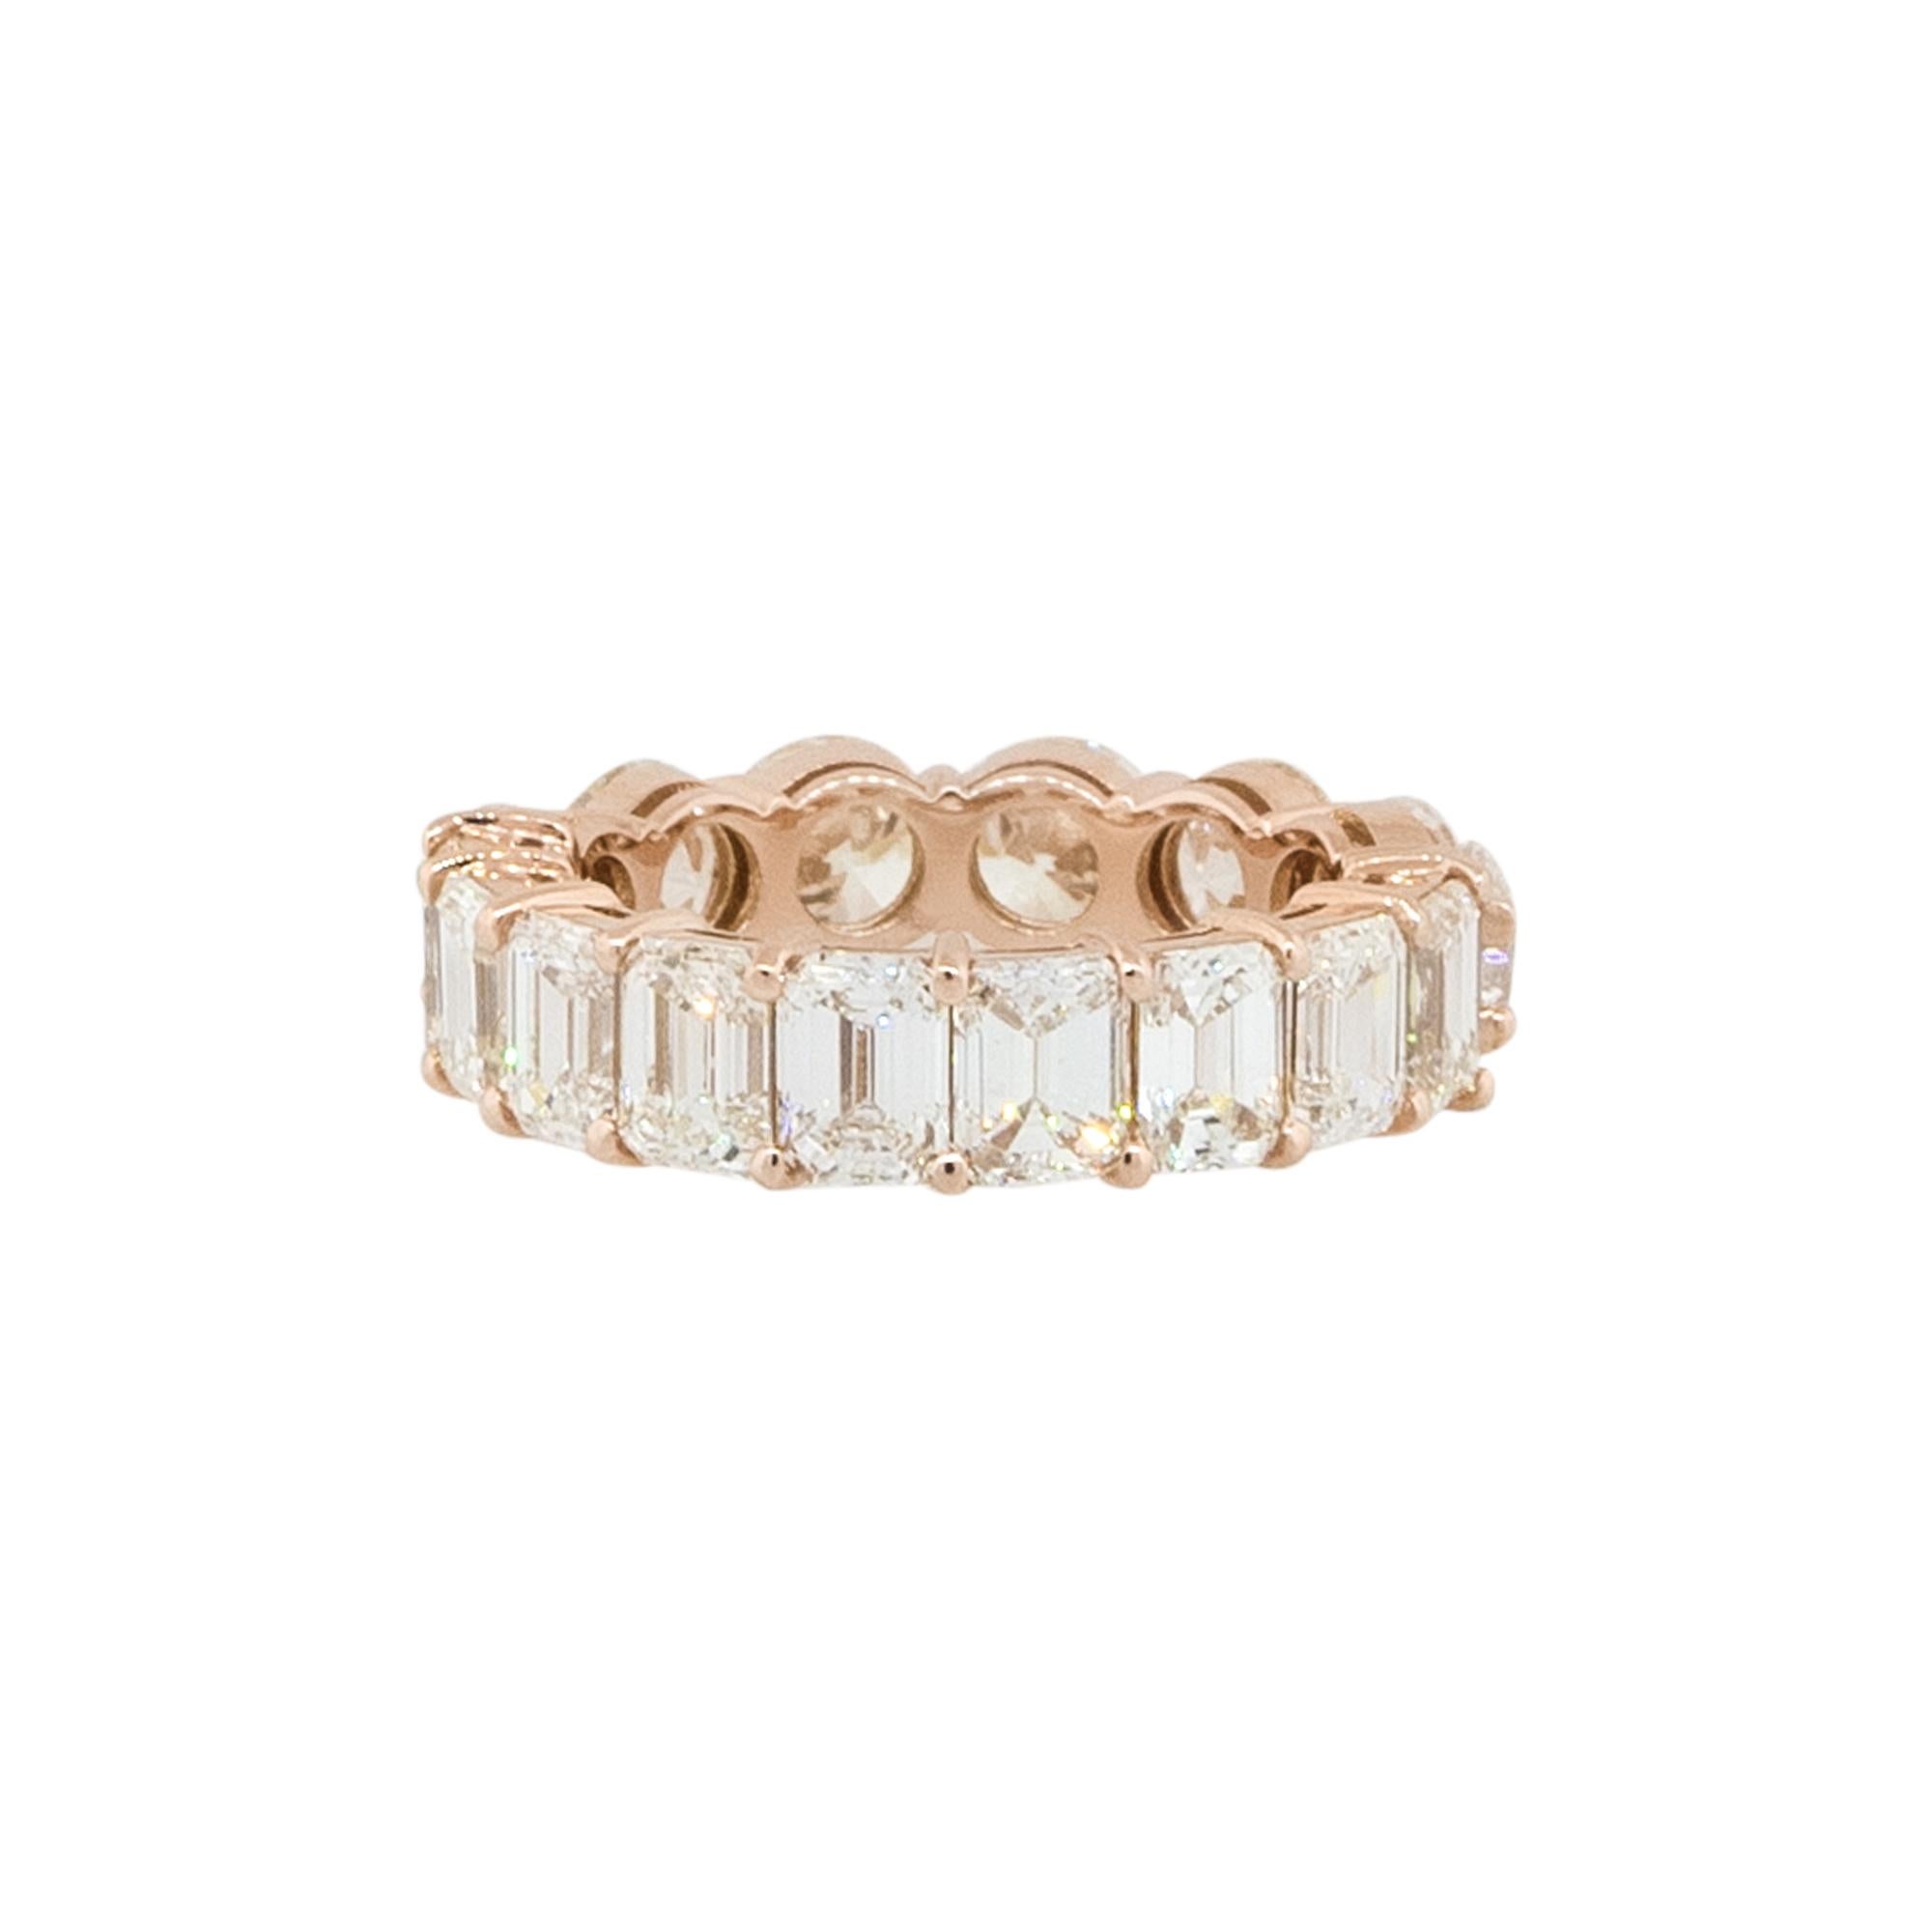 Round Cut 7.37 Carat Round and Emerald Cut Diamond Eternity Band Ring 14 Karat in Stock For Sale